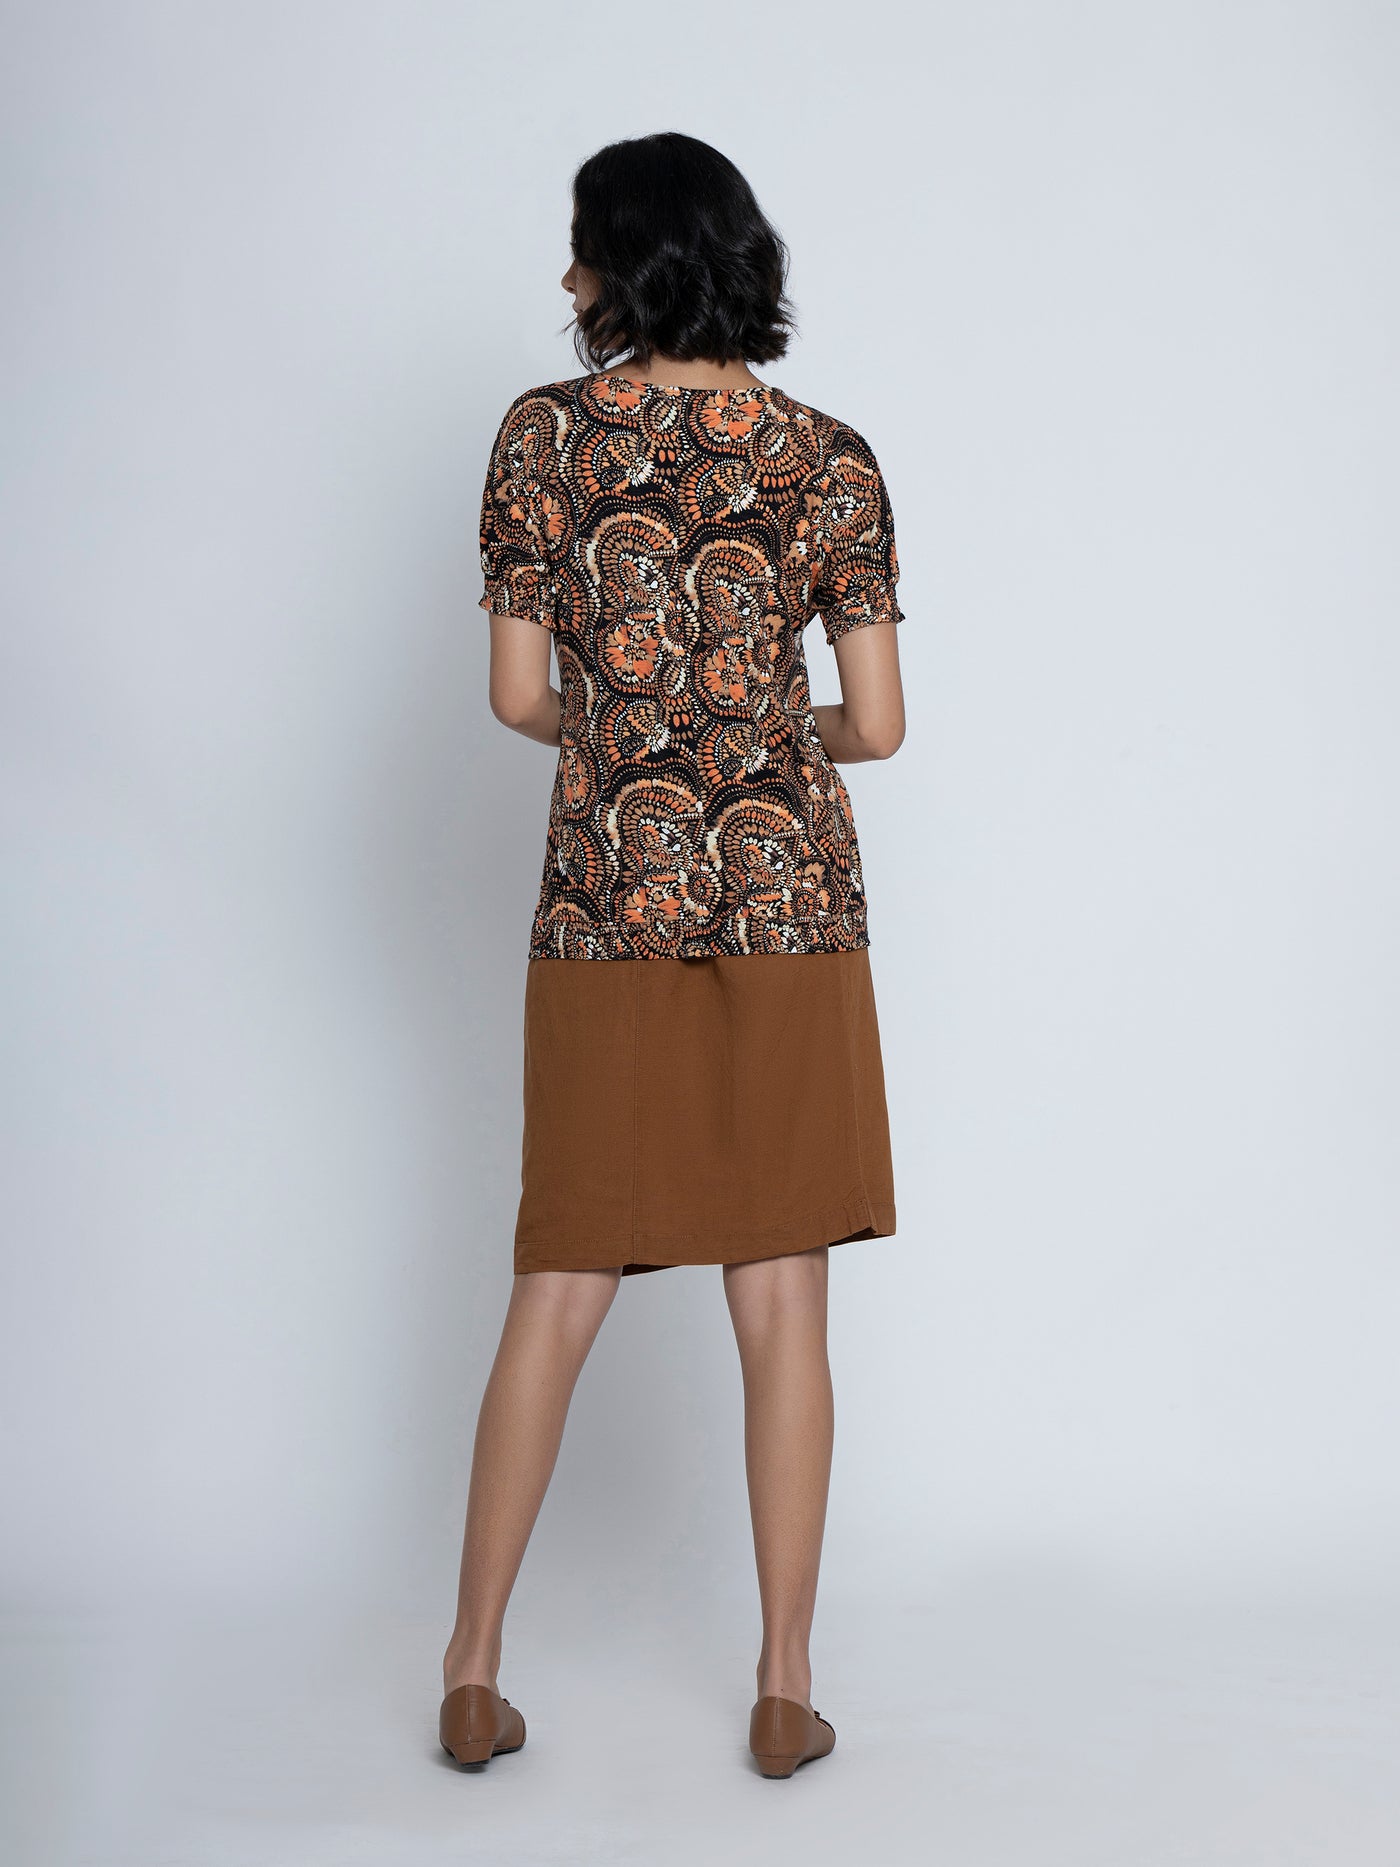 All Over Printed Brown Hues Top